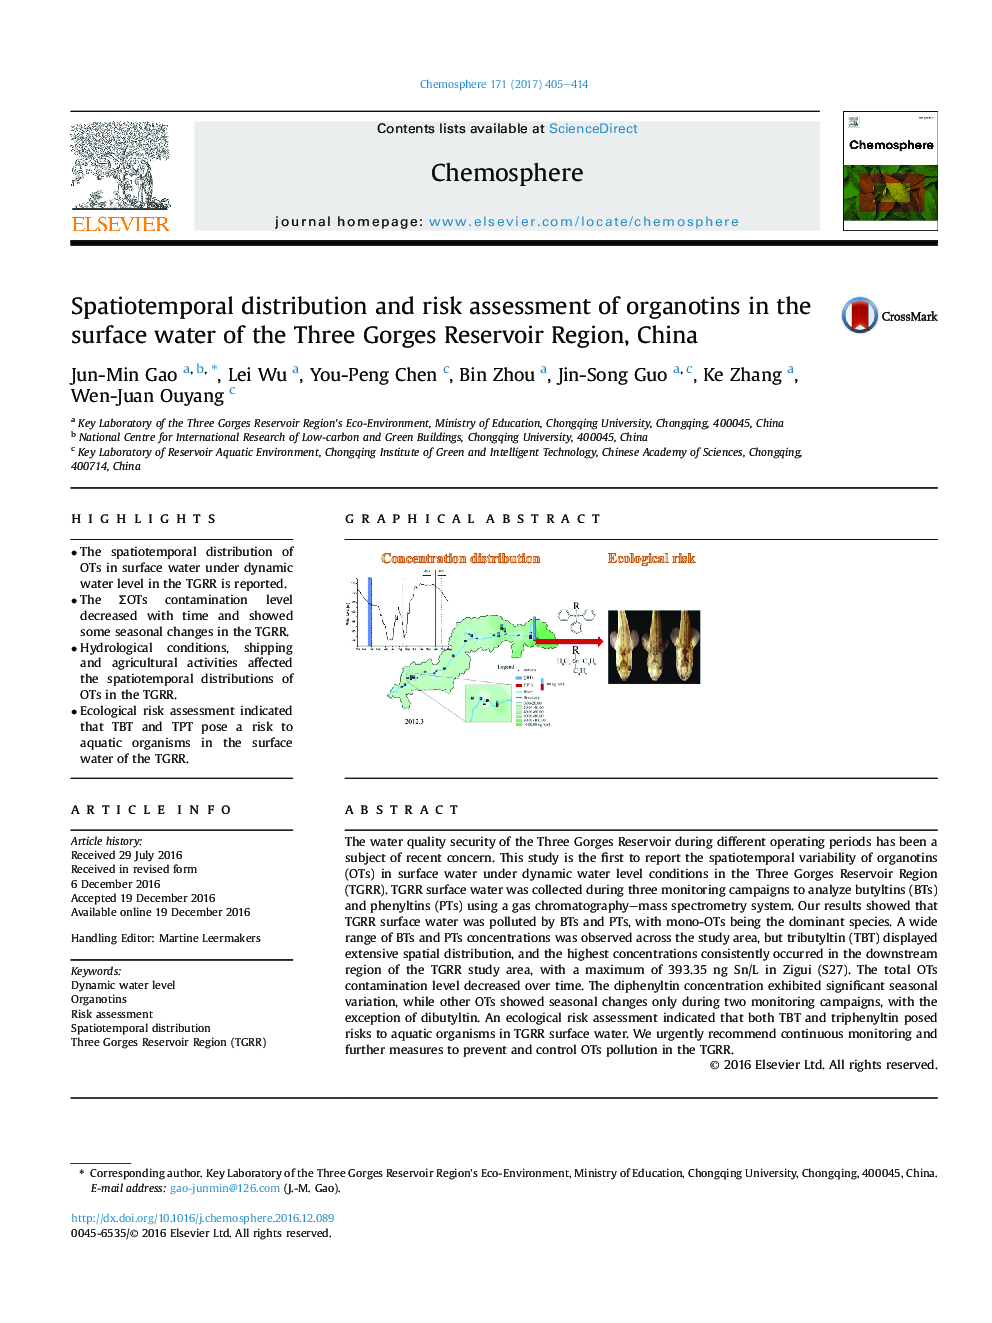 Spatiotemporal distribution and risk assessment of organotins in the surface water of the Three Gorges Reservoir Region, China